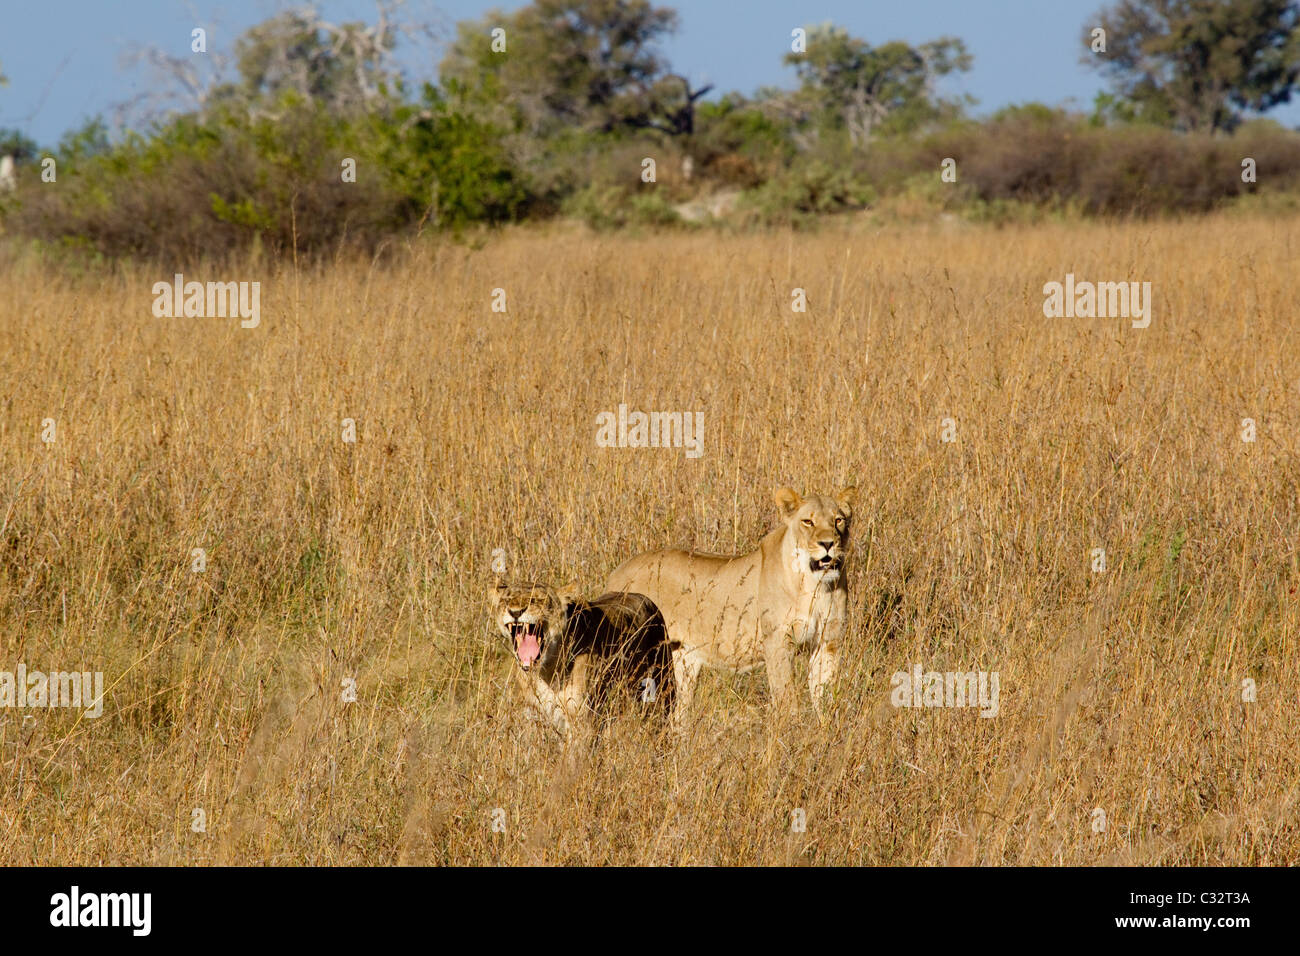 Lions on the African plains Stock Photo